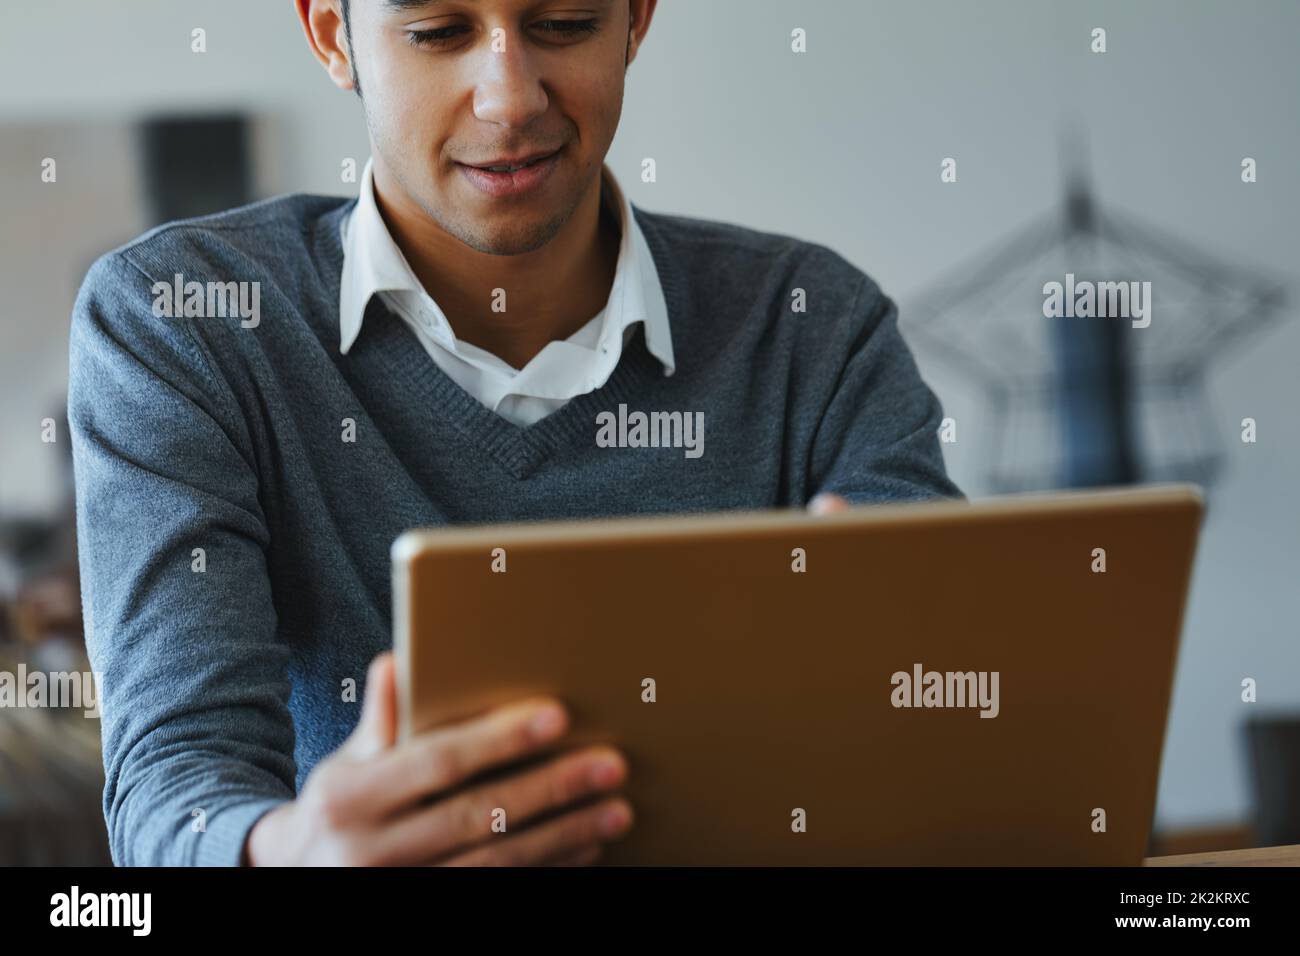 Young Black man reading or watching media on a tablet pc Stock Photo